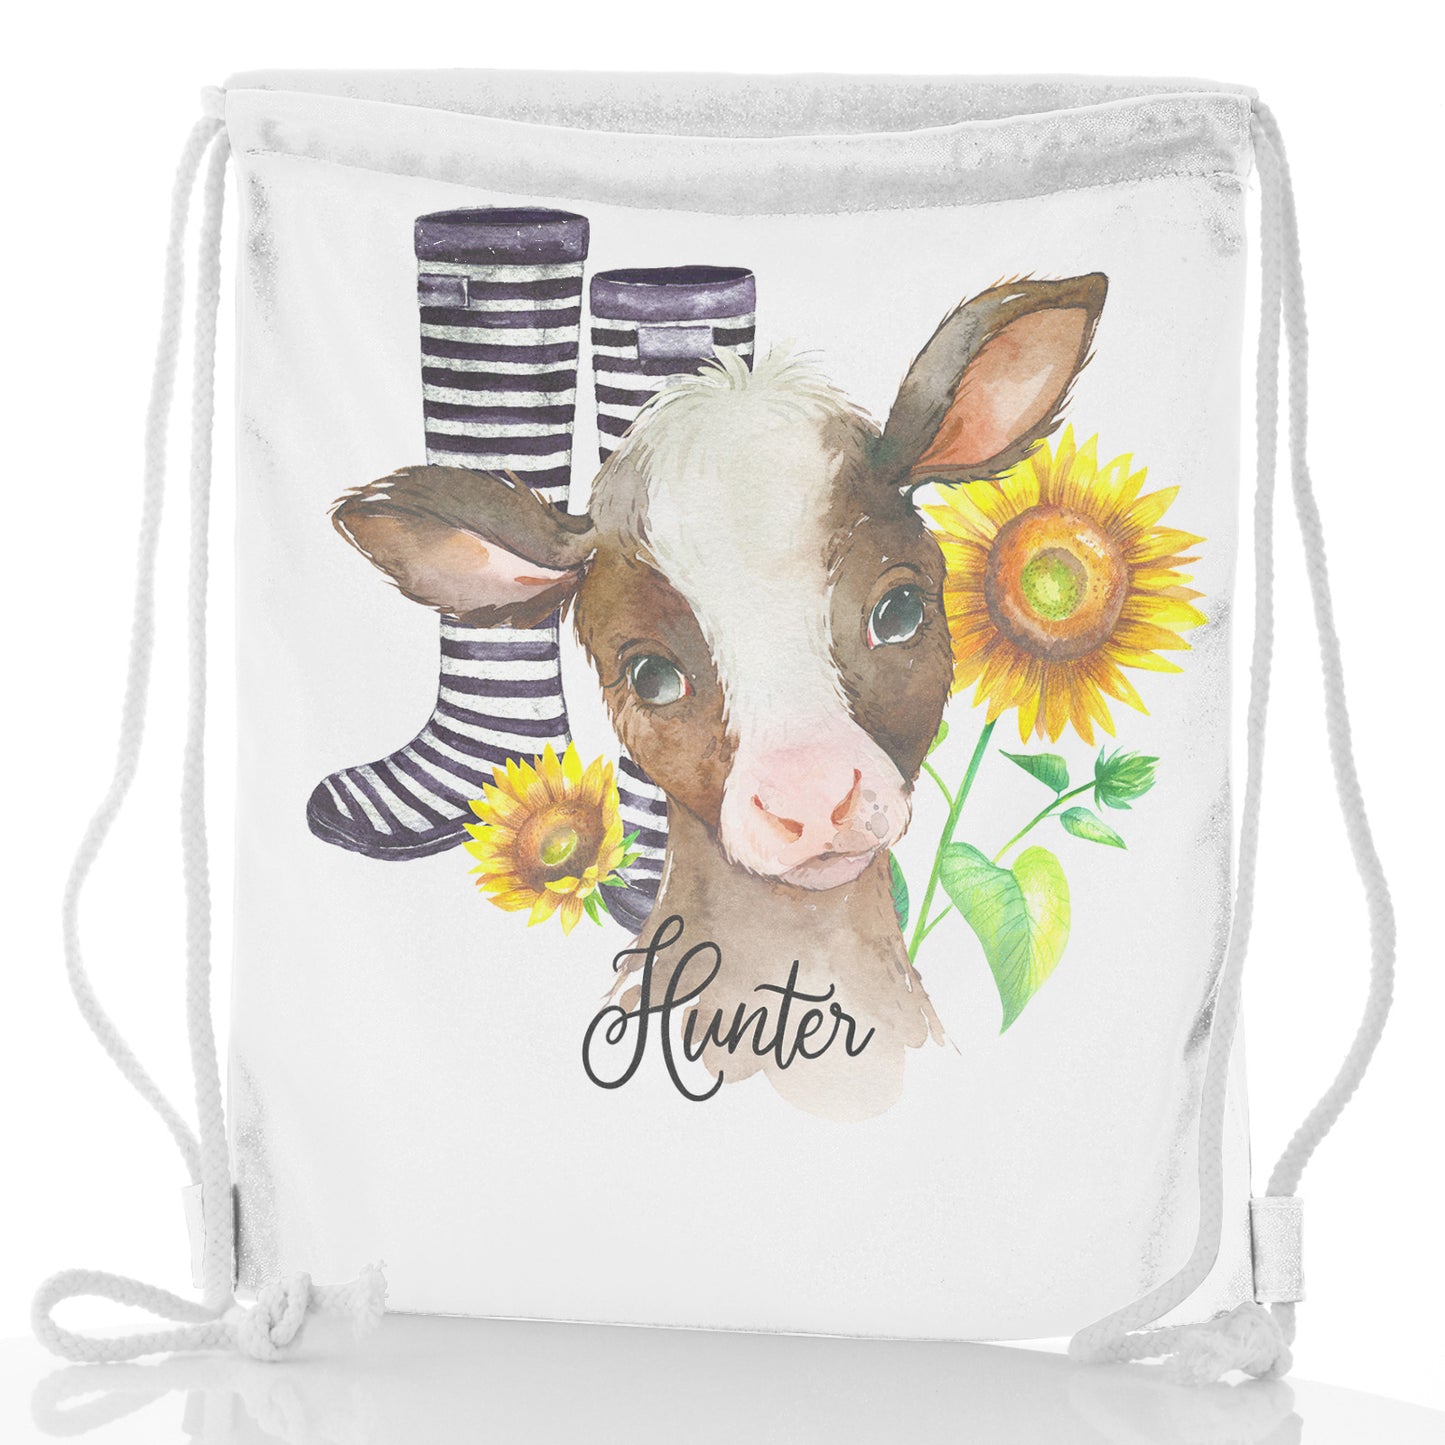 Personalised Glitter Drawstring Backpack with Brown Cow Yellow Sunflowers and Cute Text